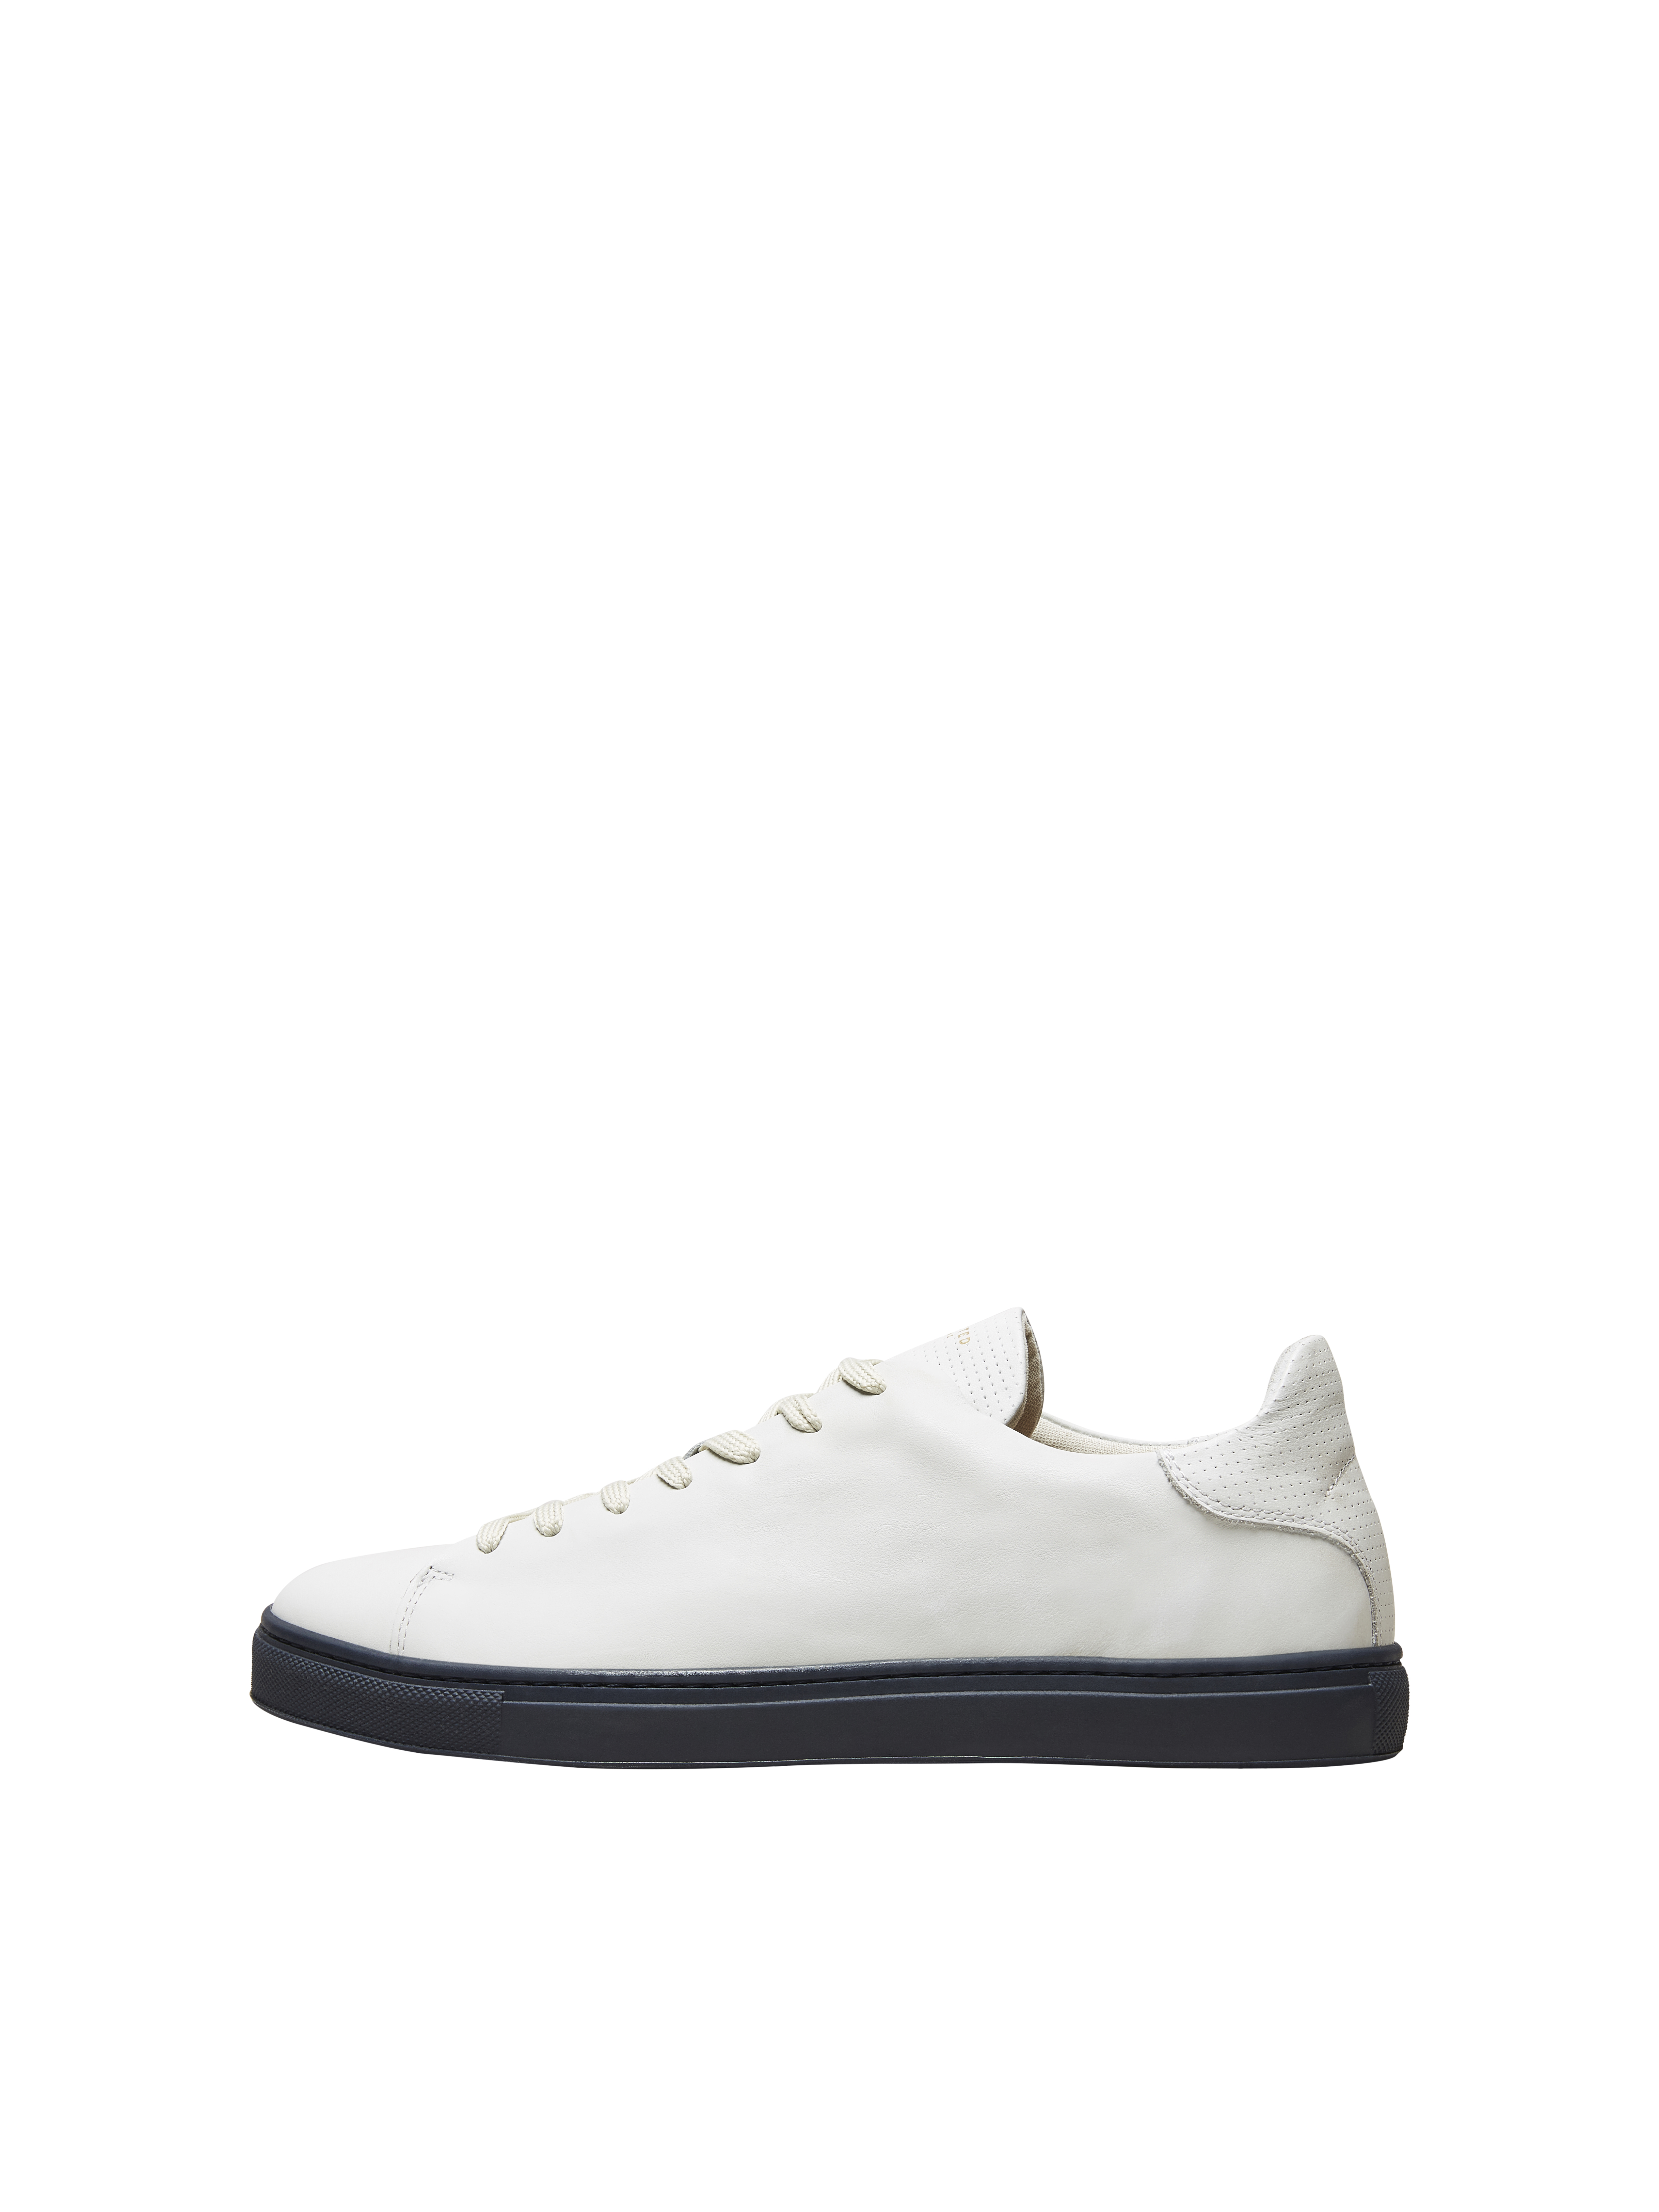 Selected Homme David Leather Trainers - White/Navy Rim